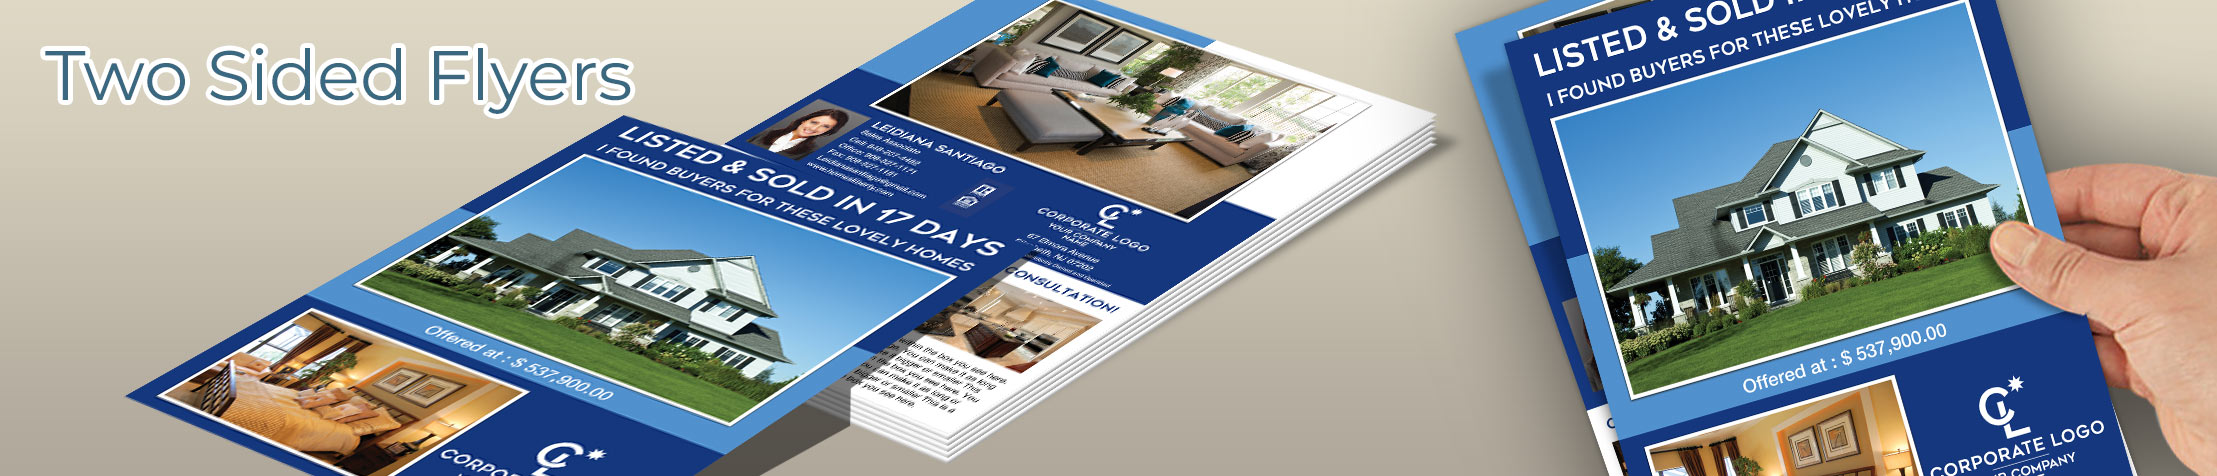 Coldwell Banker Real Estate Flyers and Brochures - Coldwell Banker two-sided flyer templates for open houses and marketing | BestPrintBuy.com